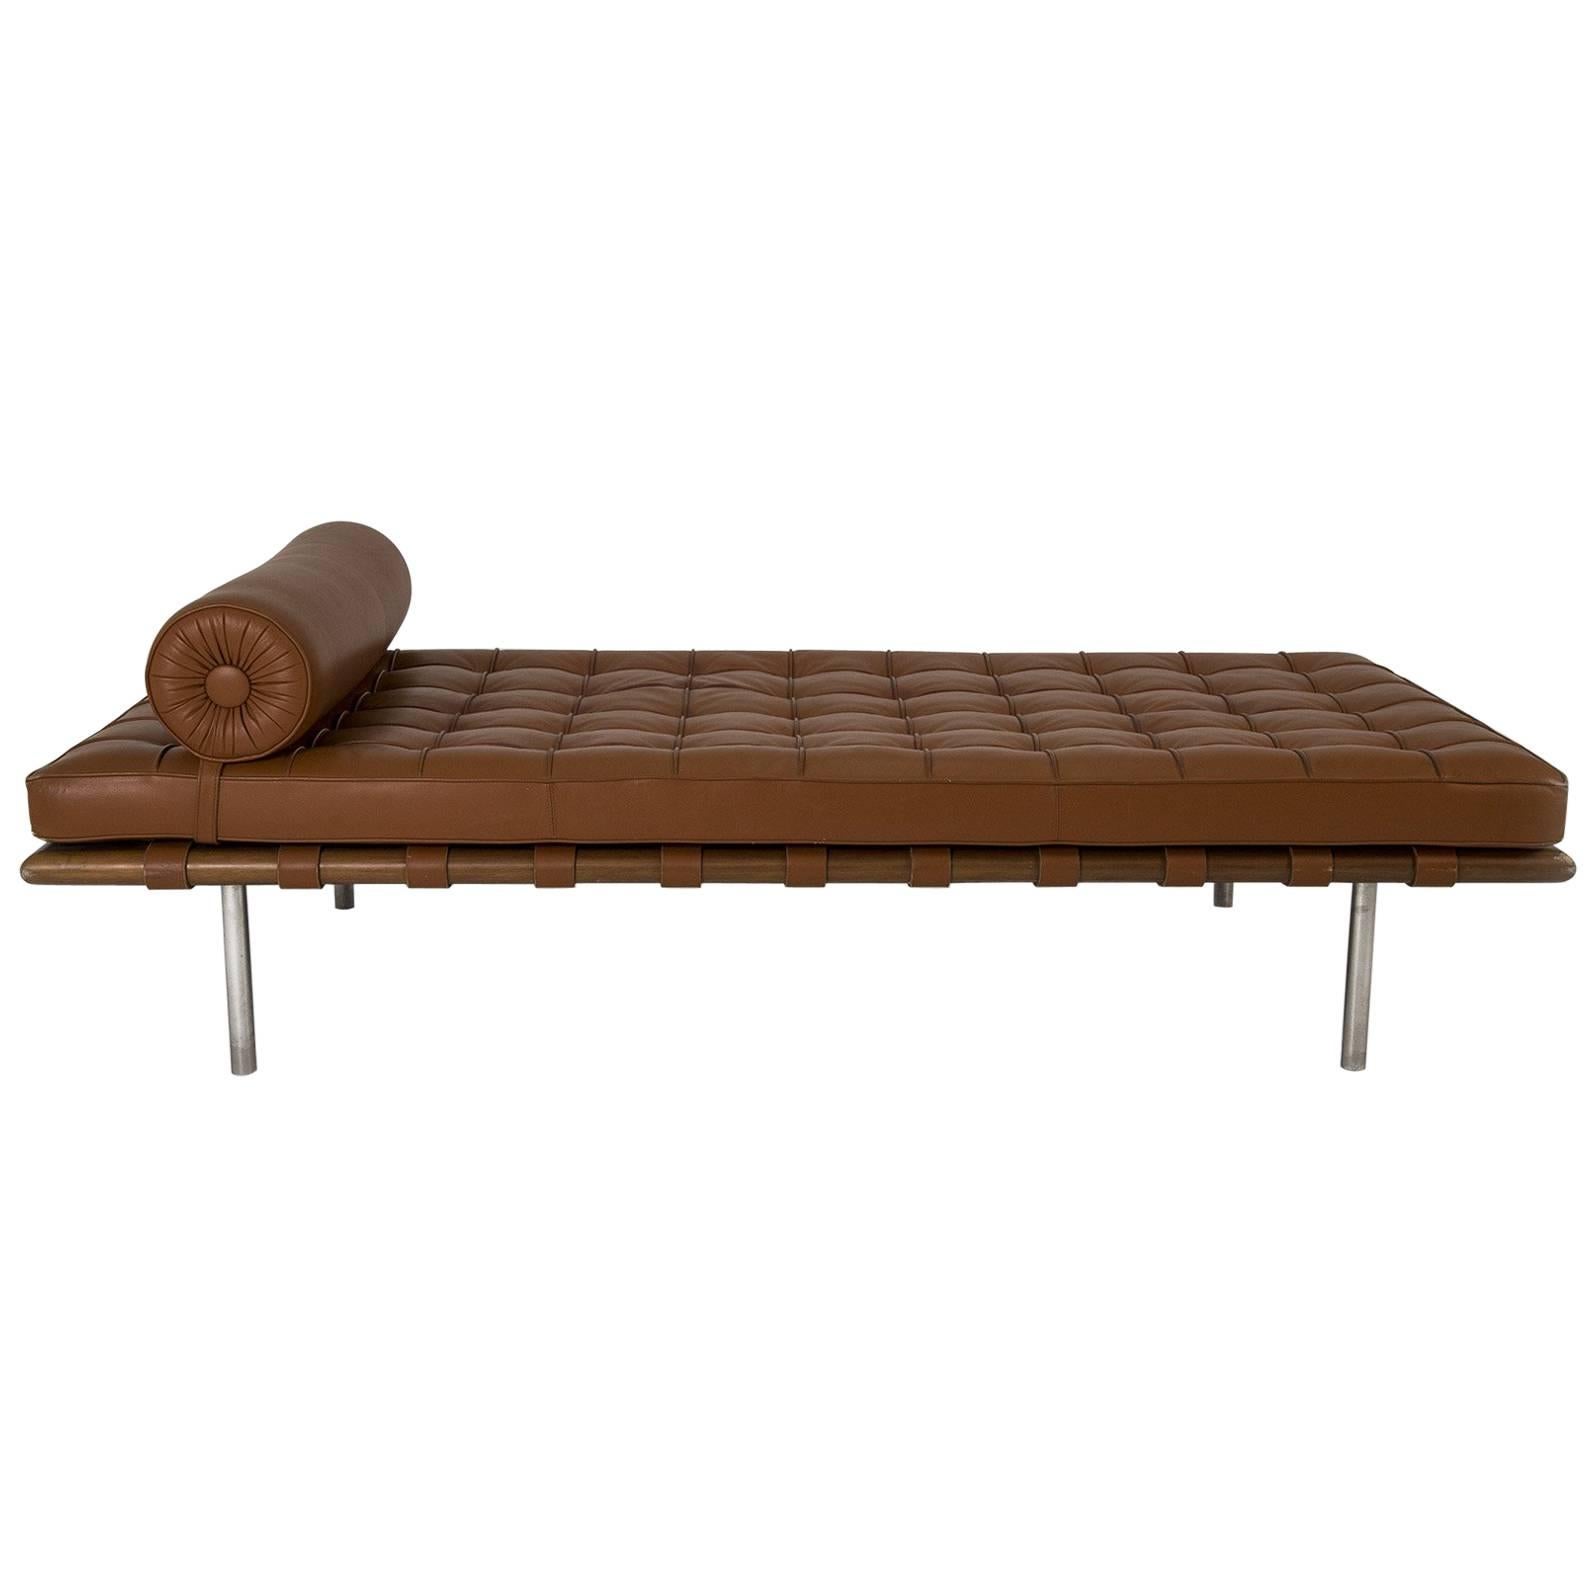 "Barcelona" Daybed by Mies van der Rohe for Knoll